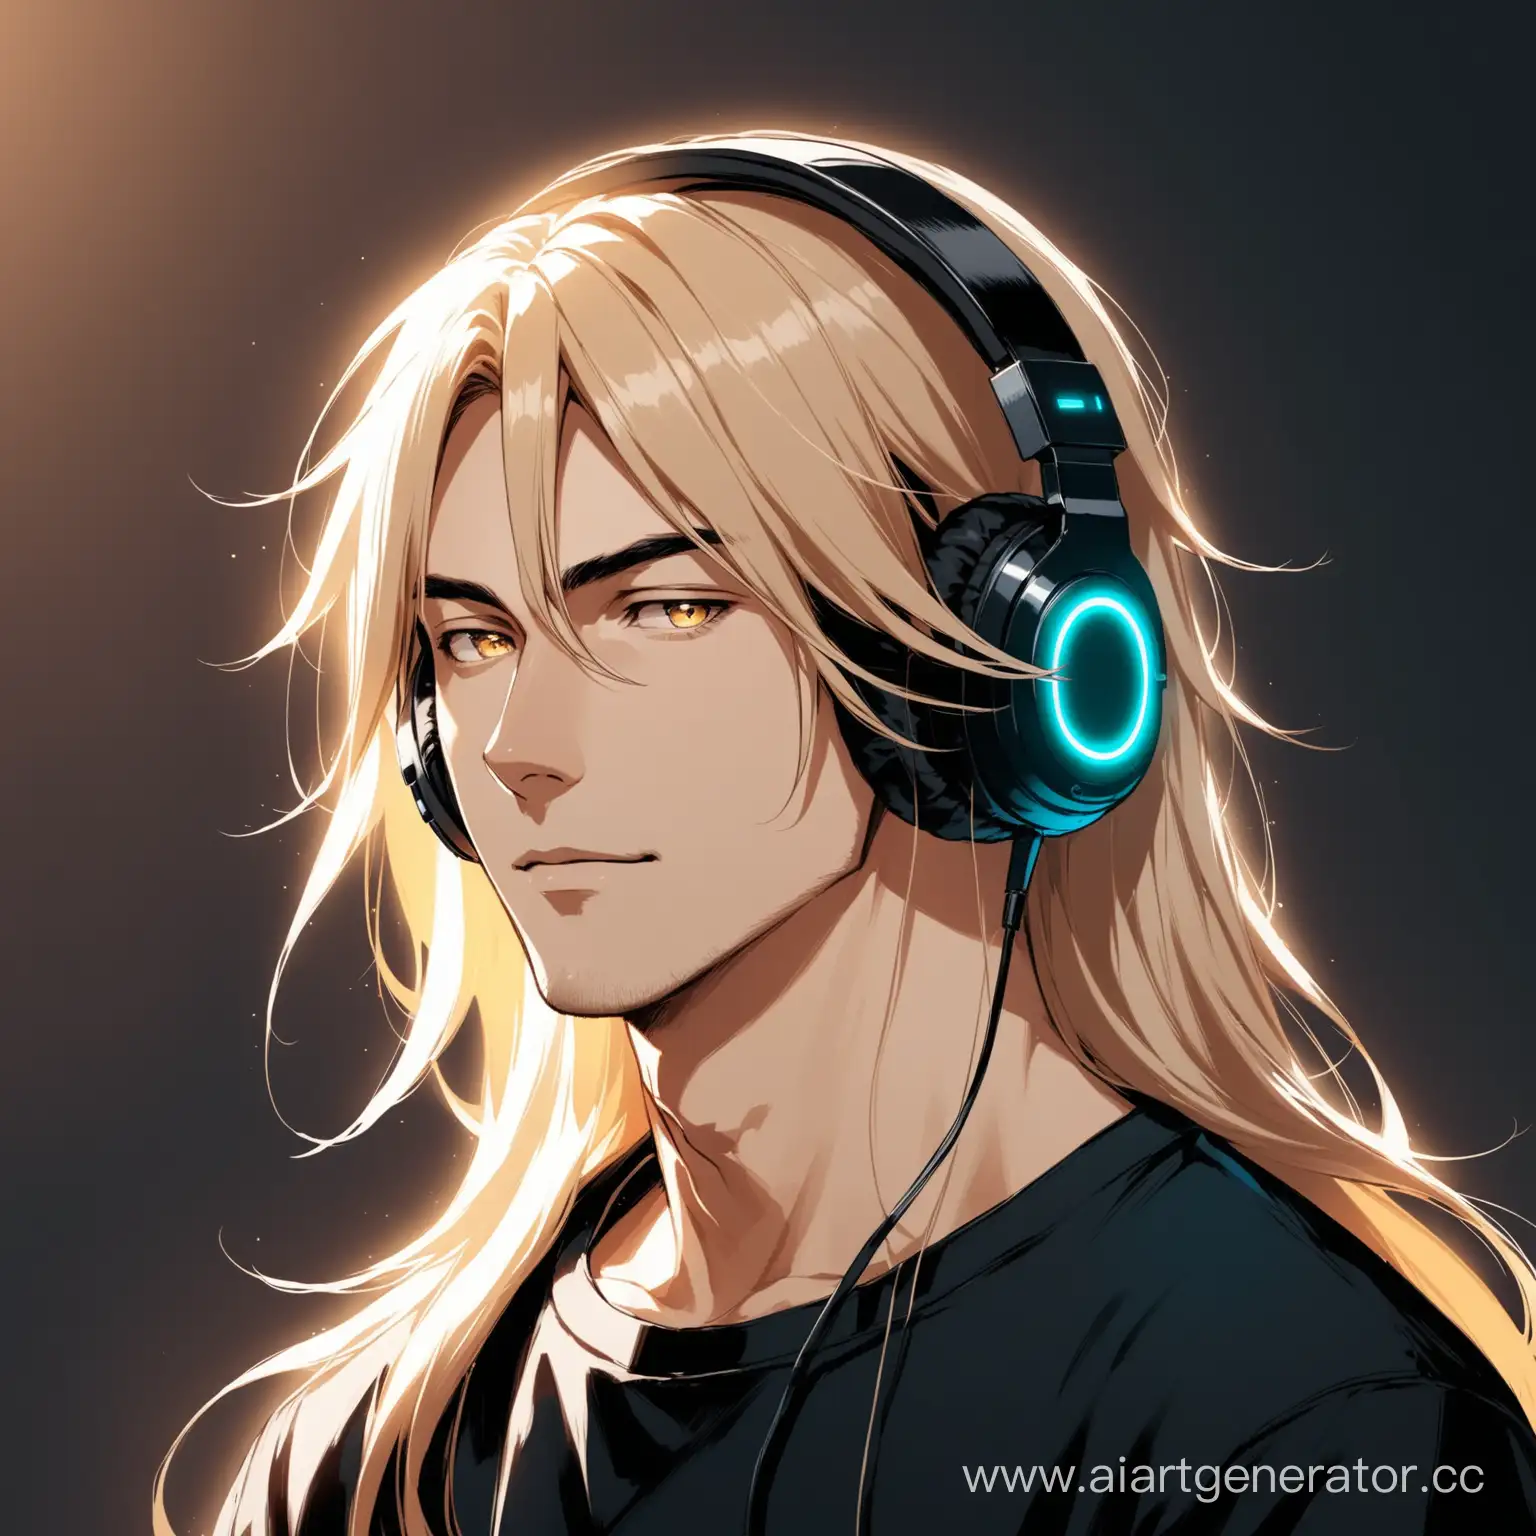 Young-Man-with-Long-Light-Hair-Wearing-Headphones-in-Black